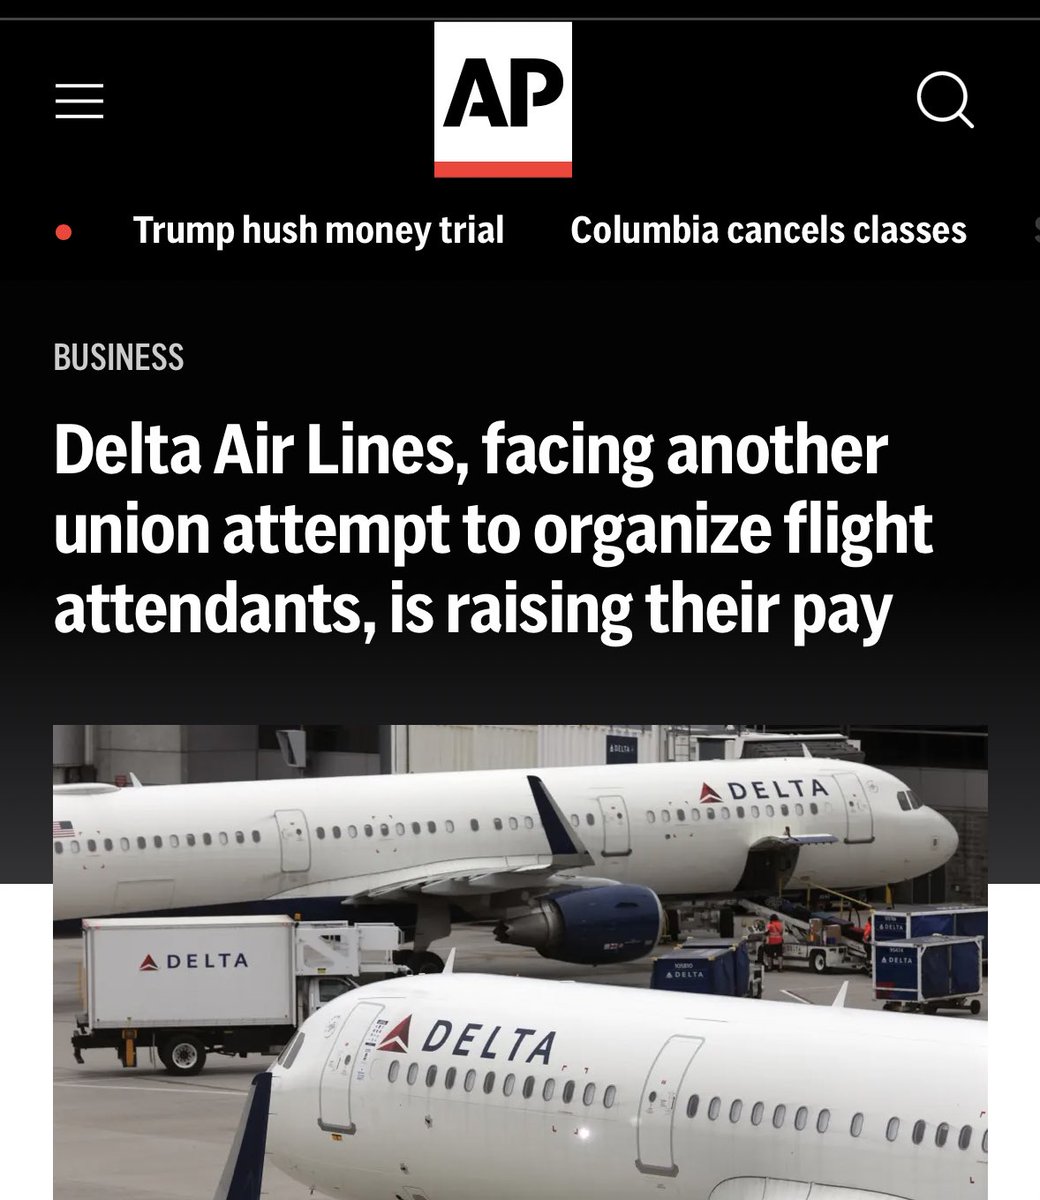 “Delta has become the leader in generating profits, and that means Delta flight attendants should be leading on pay and benefits, and they are not,” @FlyingWithSara said. @DeltaAFA apnews.com/article/delta-…